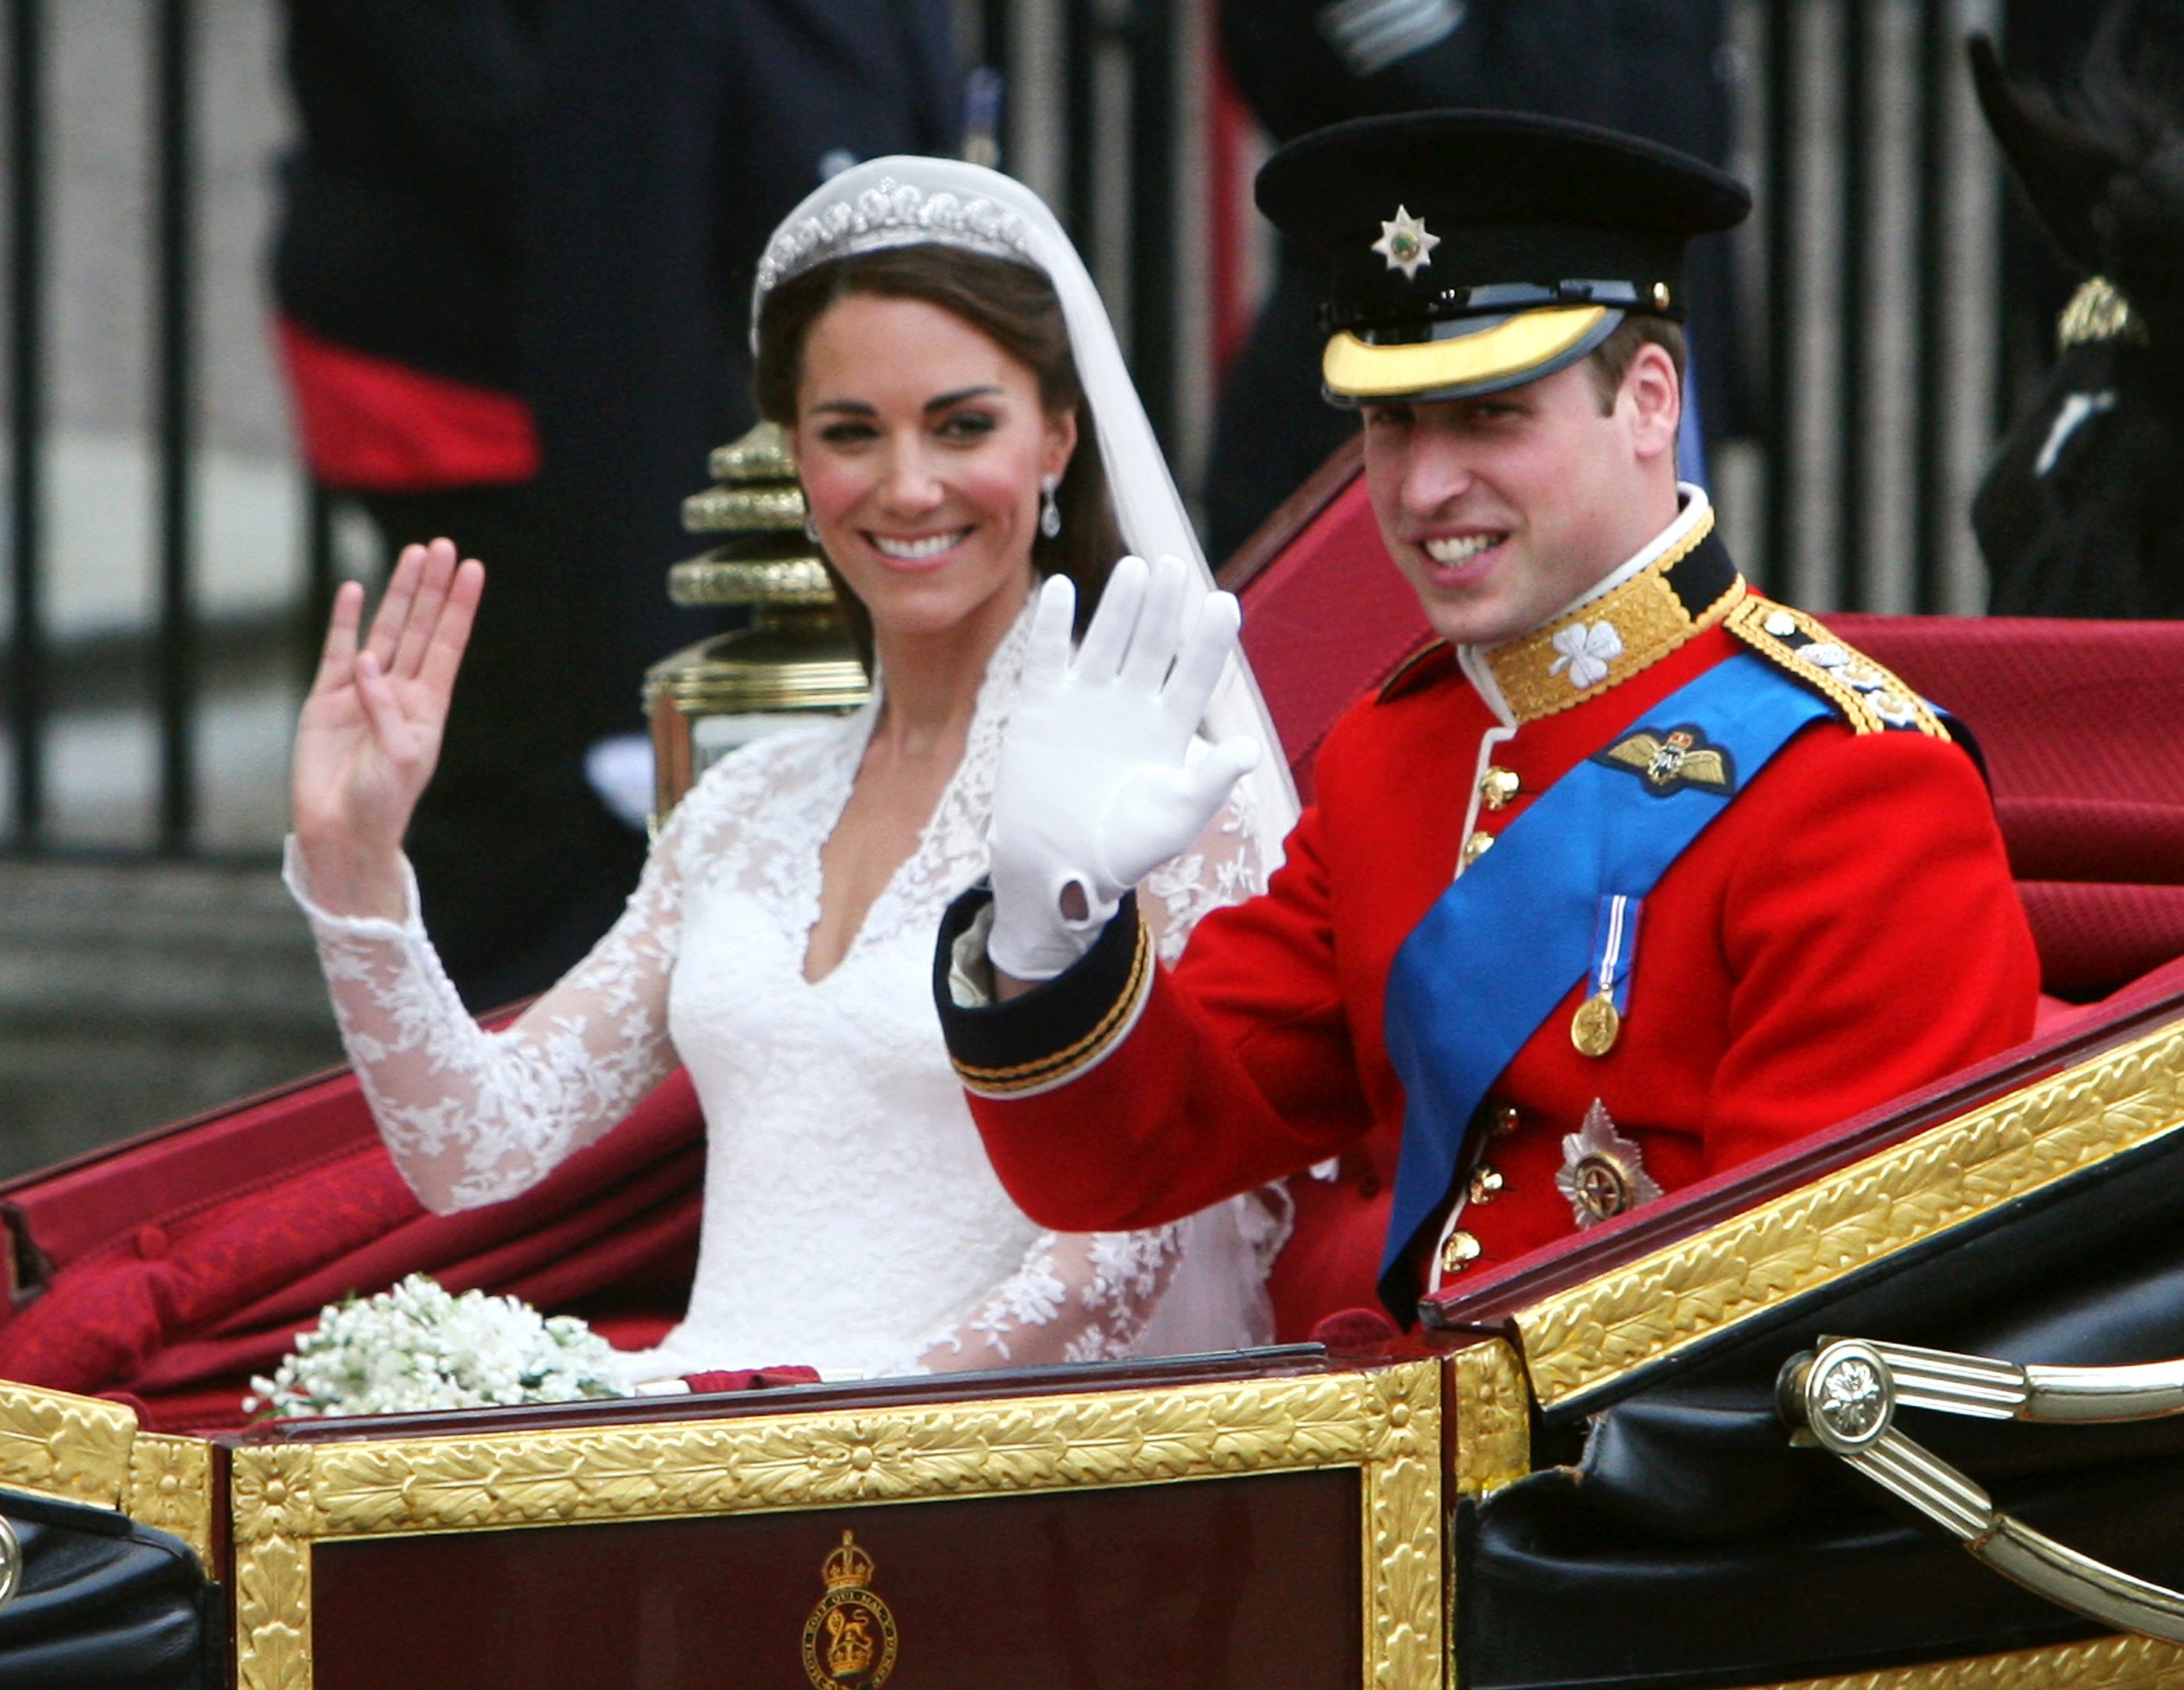 Prince William and his bride Kate leave Westminster Abbey in London as man and wife after their wedding.